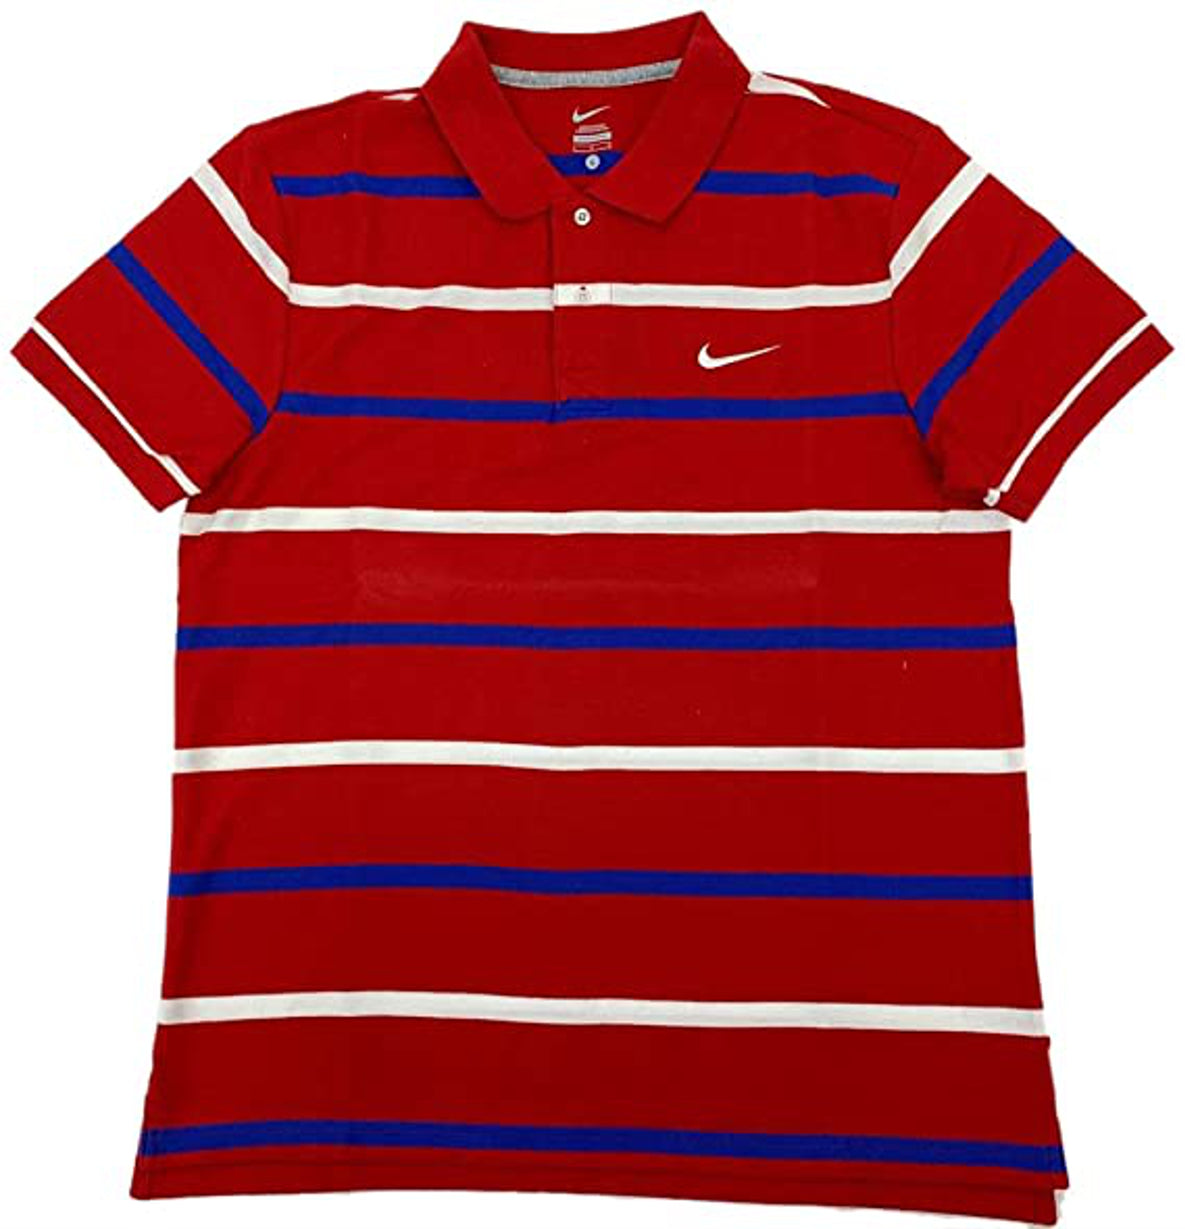 Nike Mens Short Sleeves Polo T-Shirt,Red/Multi,XXX-Large - image 1 of 2